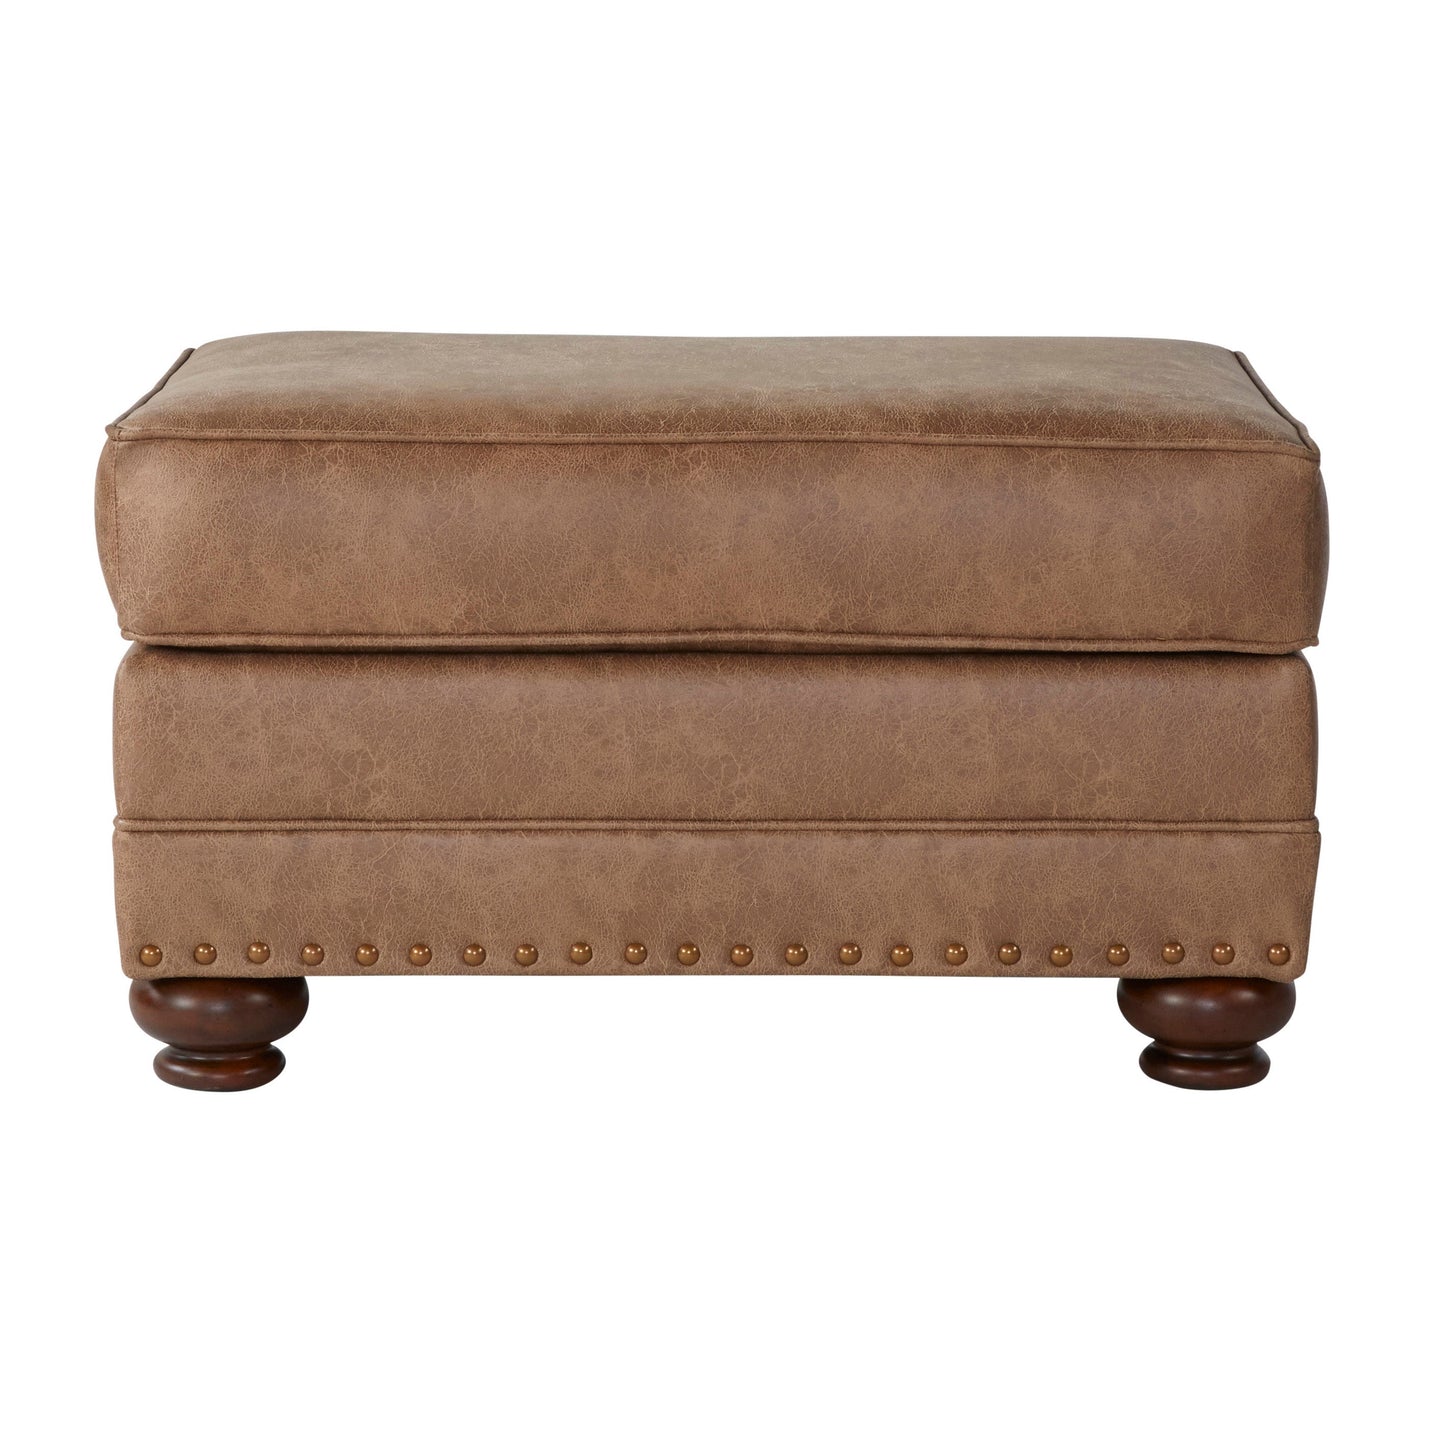 Leinster Faux Leather Ottoman with Antique Bronze Nailheads in Jetson Ginger